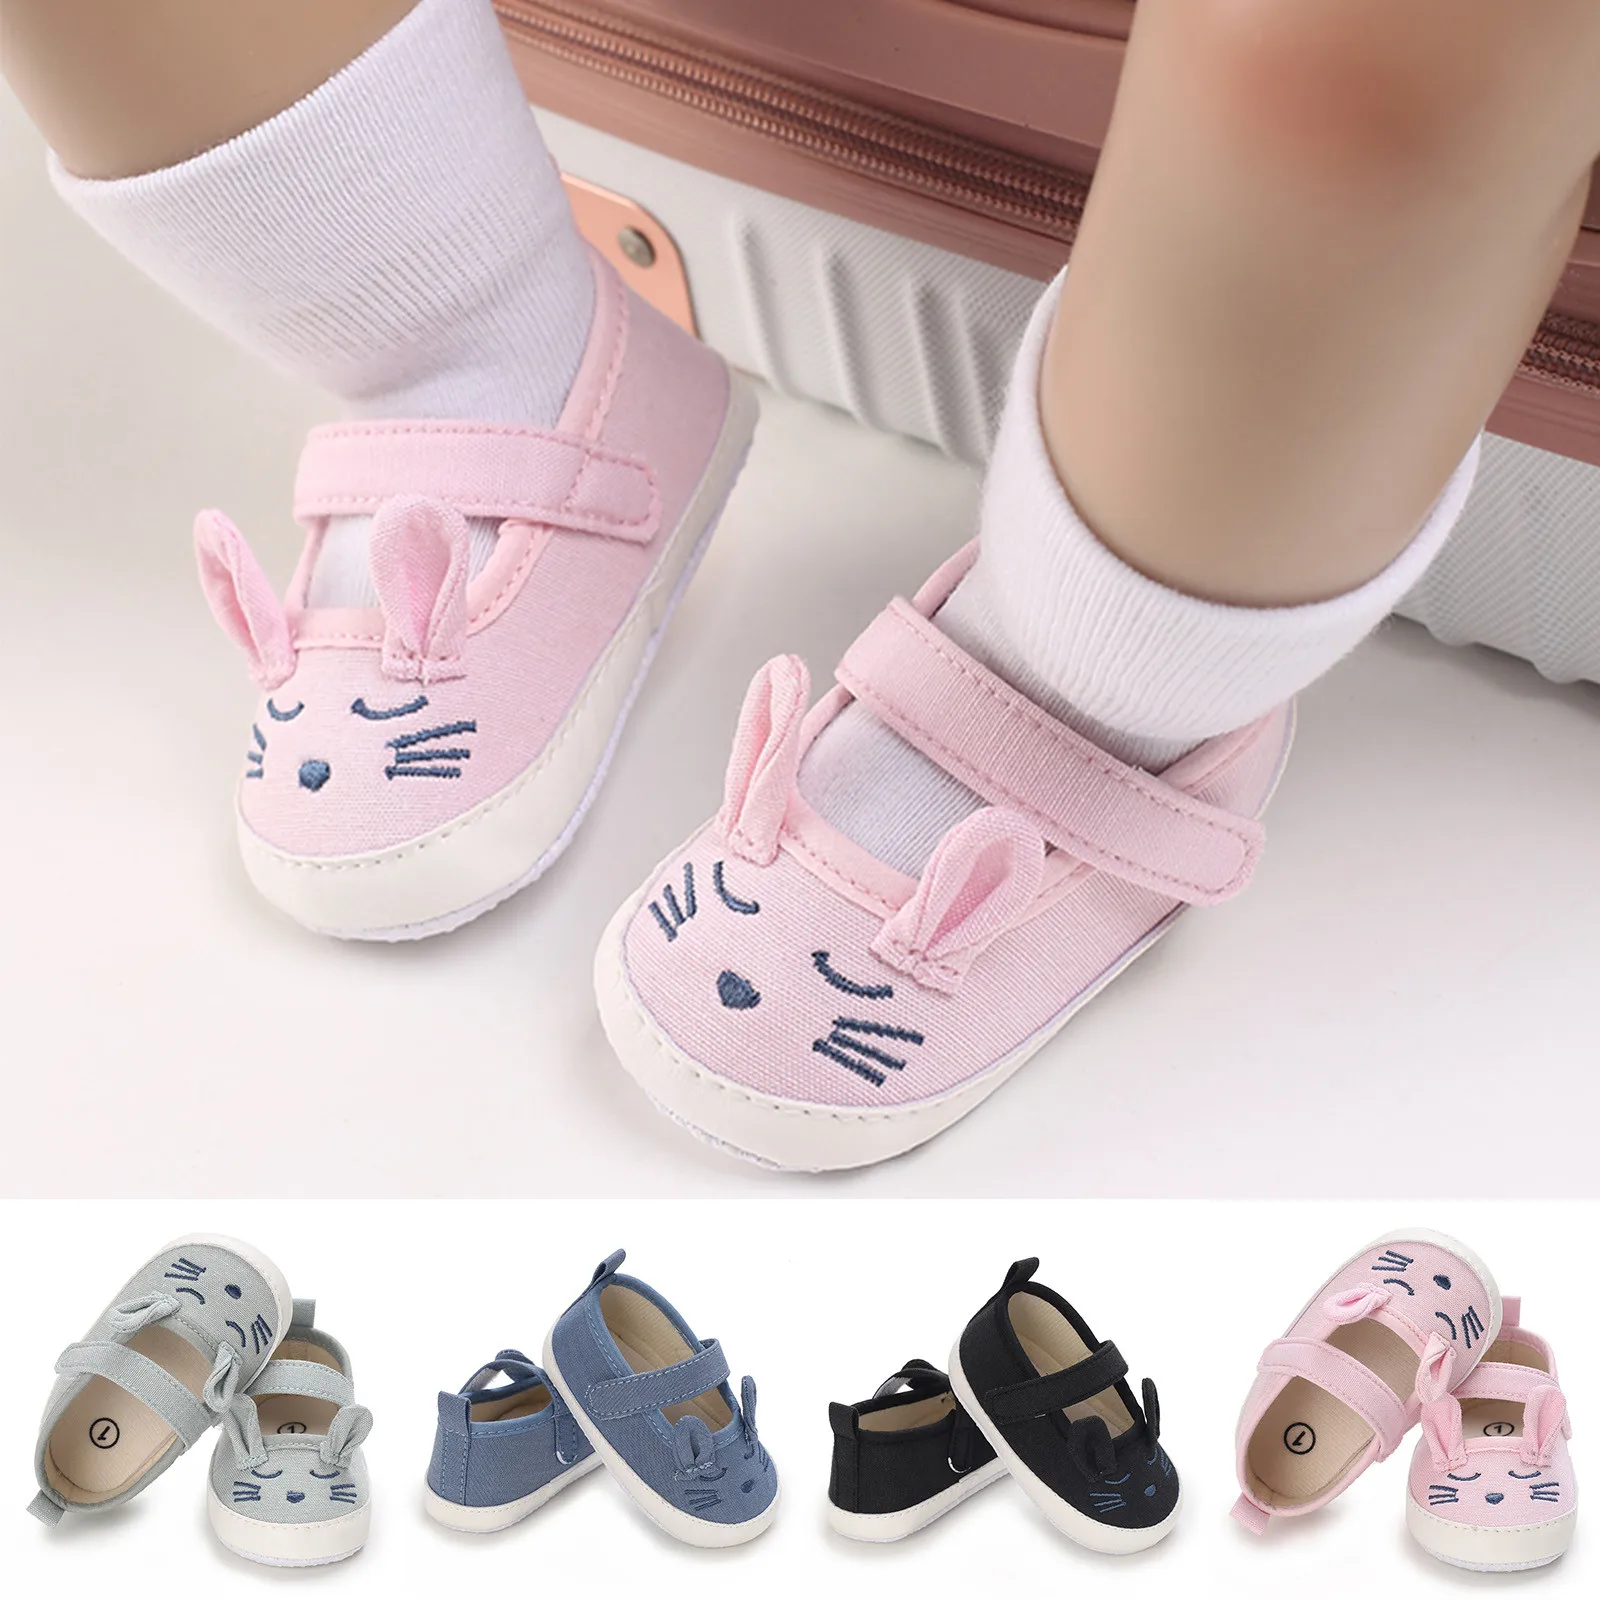 

Toddler Baby Shoes Infant Girls Boys Shoes 3D Cute Cartoon First Walkers Soft Sole The Floor Barefoot Non Slip Prewalker Shoes